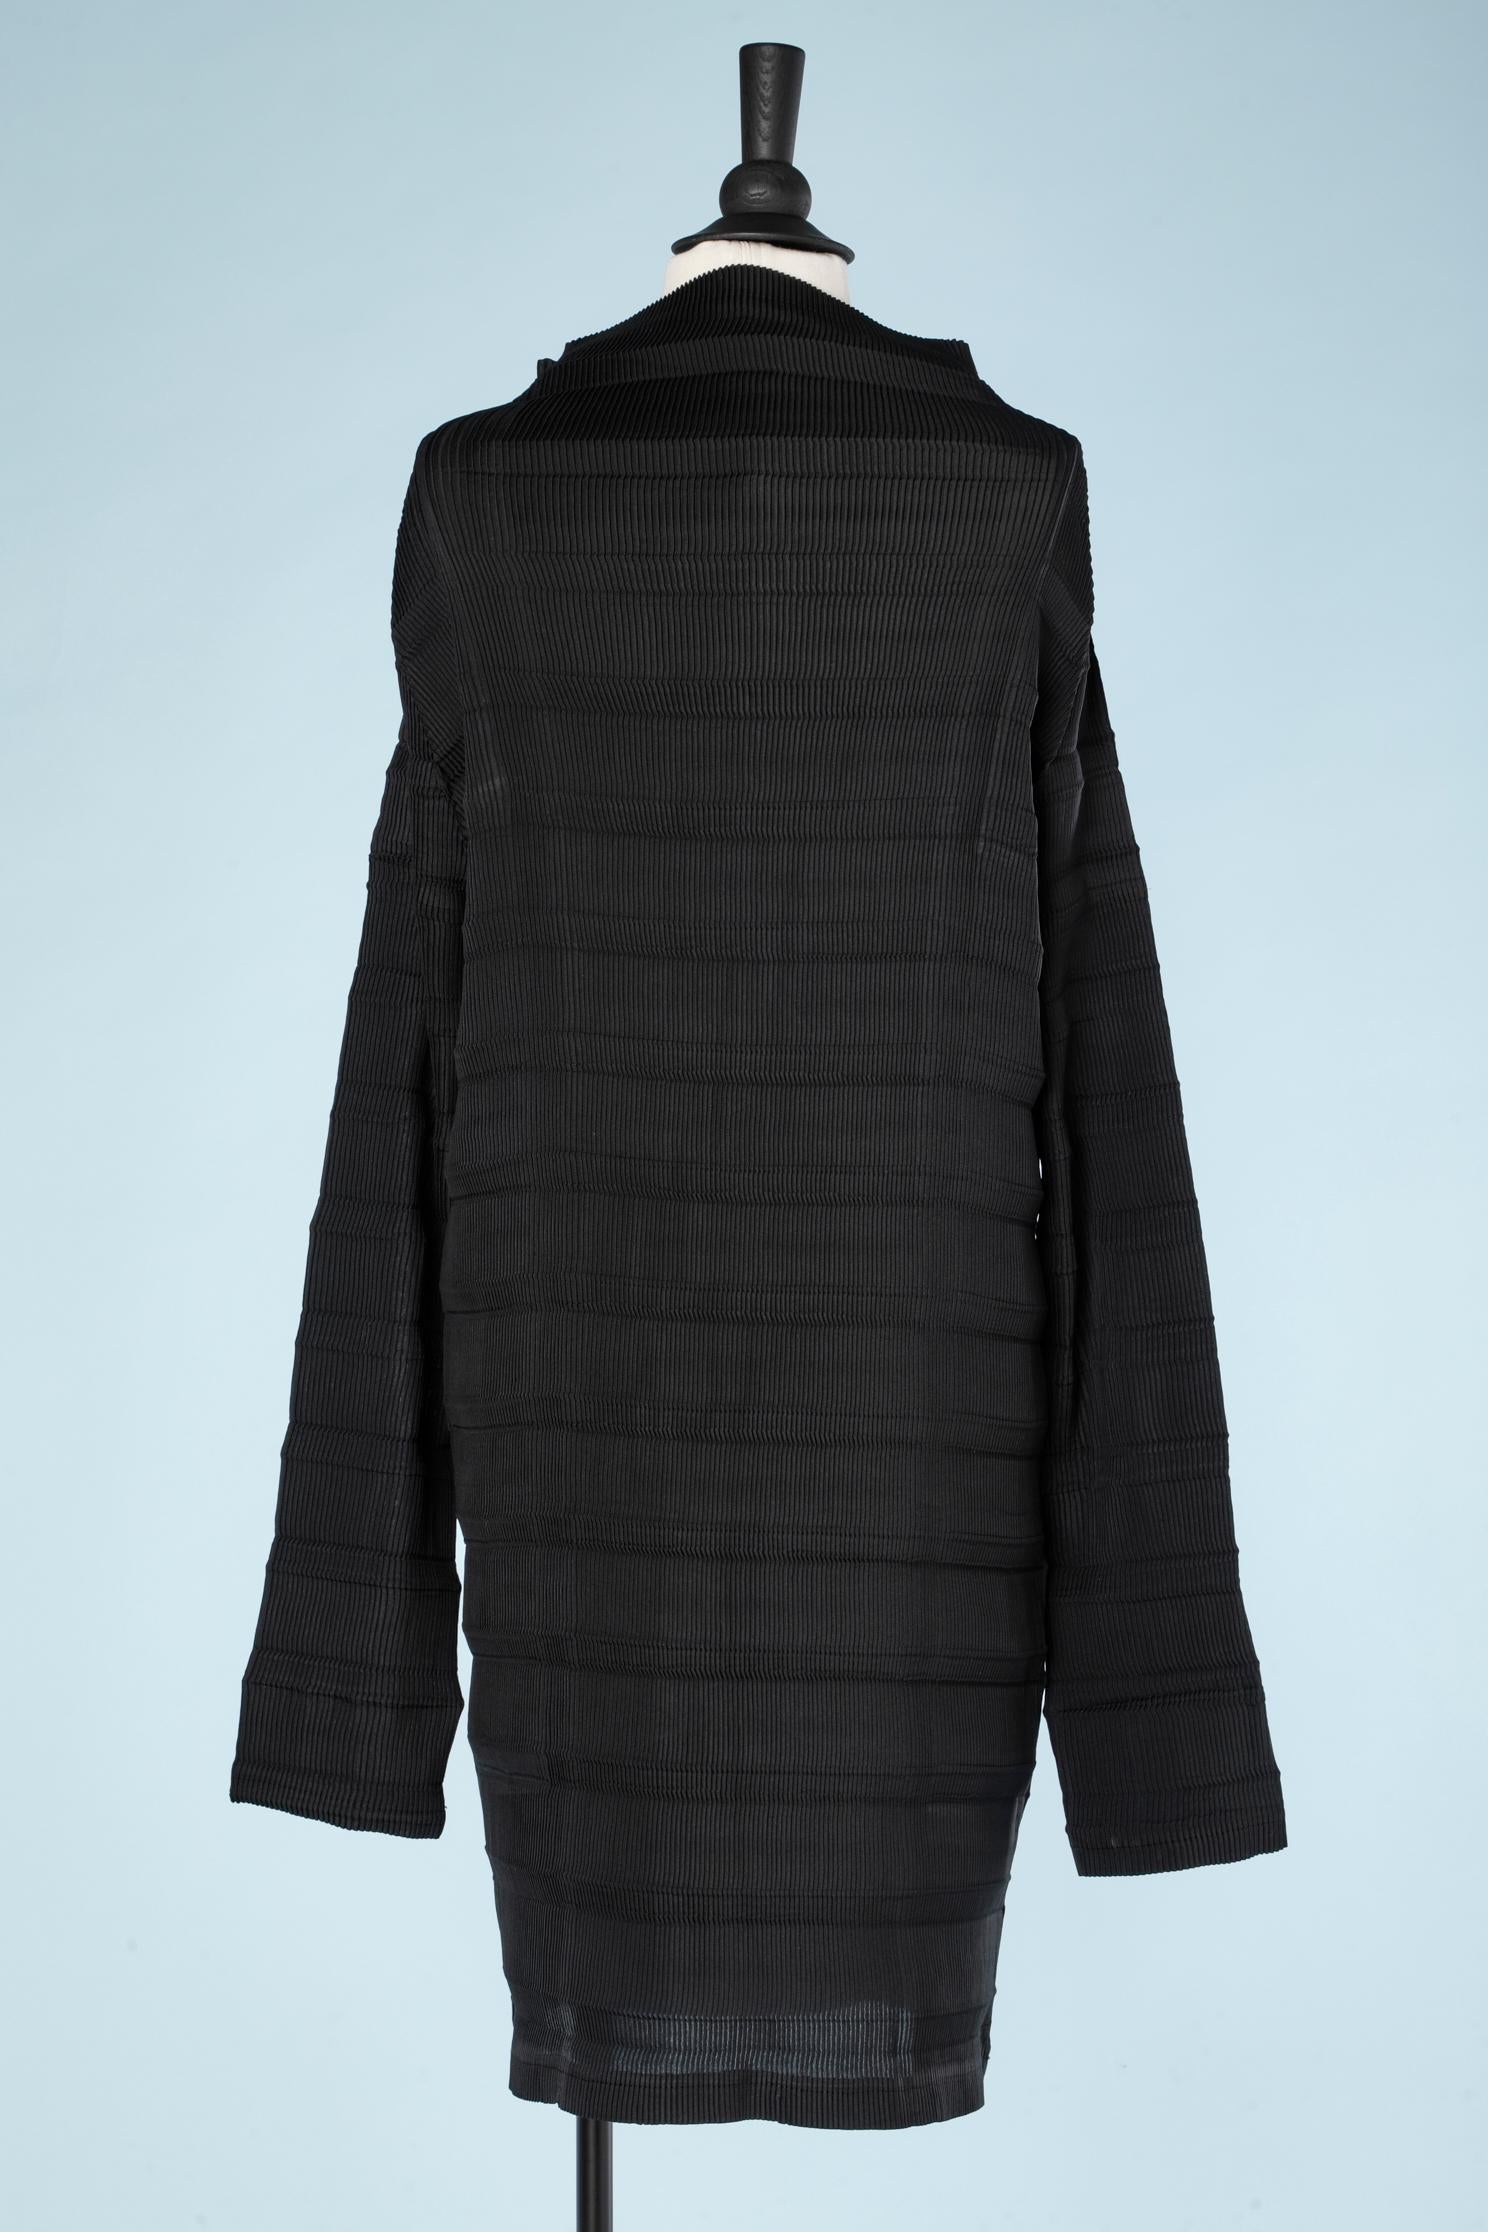 Black long pleated shirt (or dress) double-breasted Issey Miyake  For Sale 2